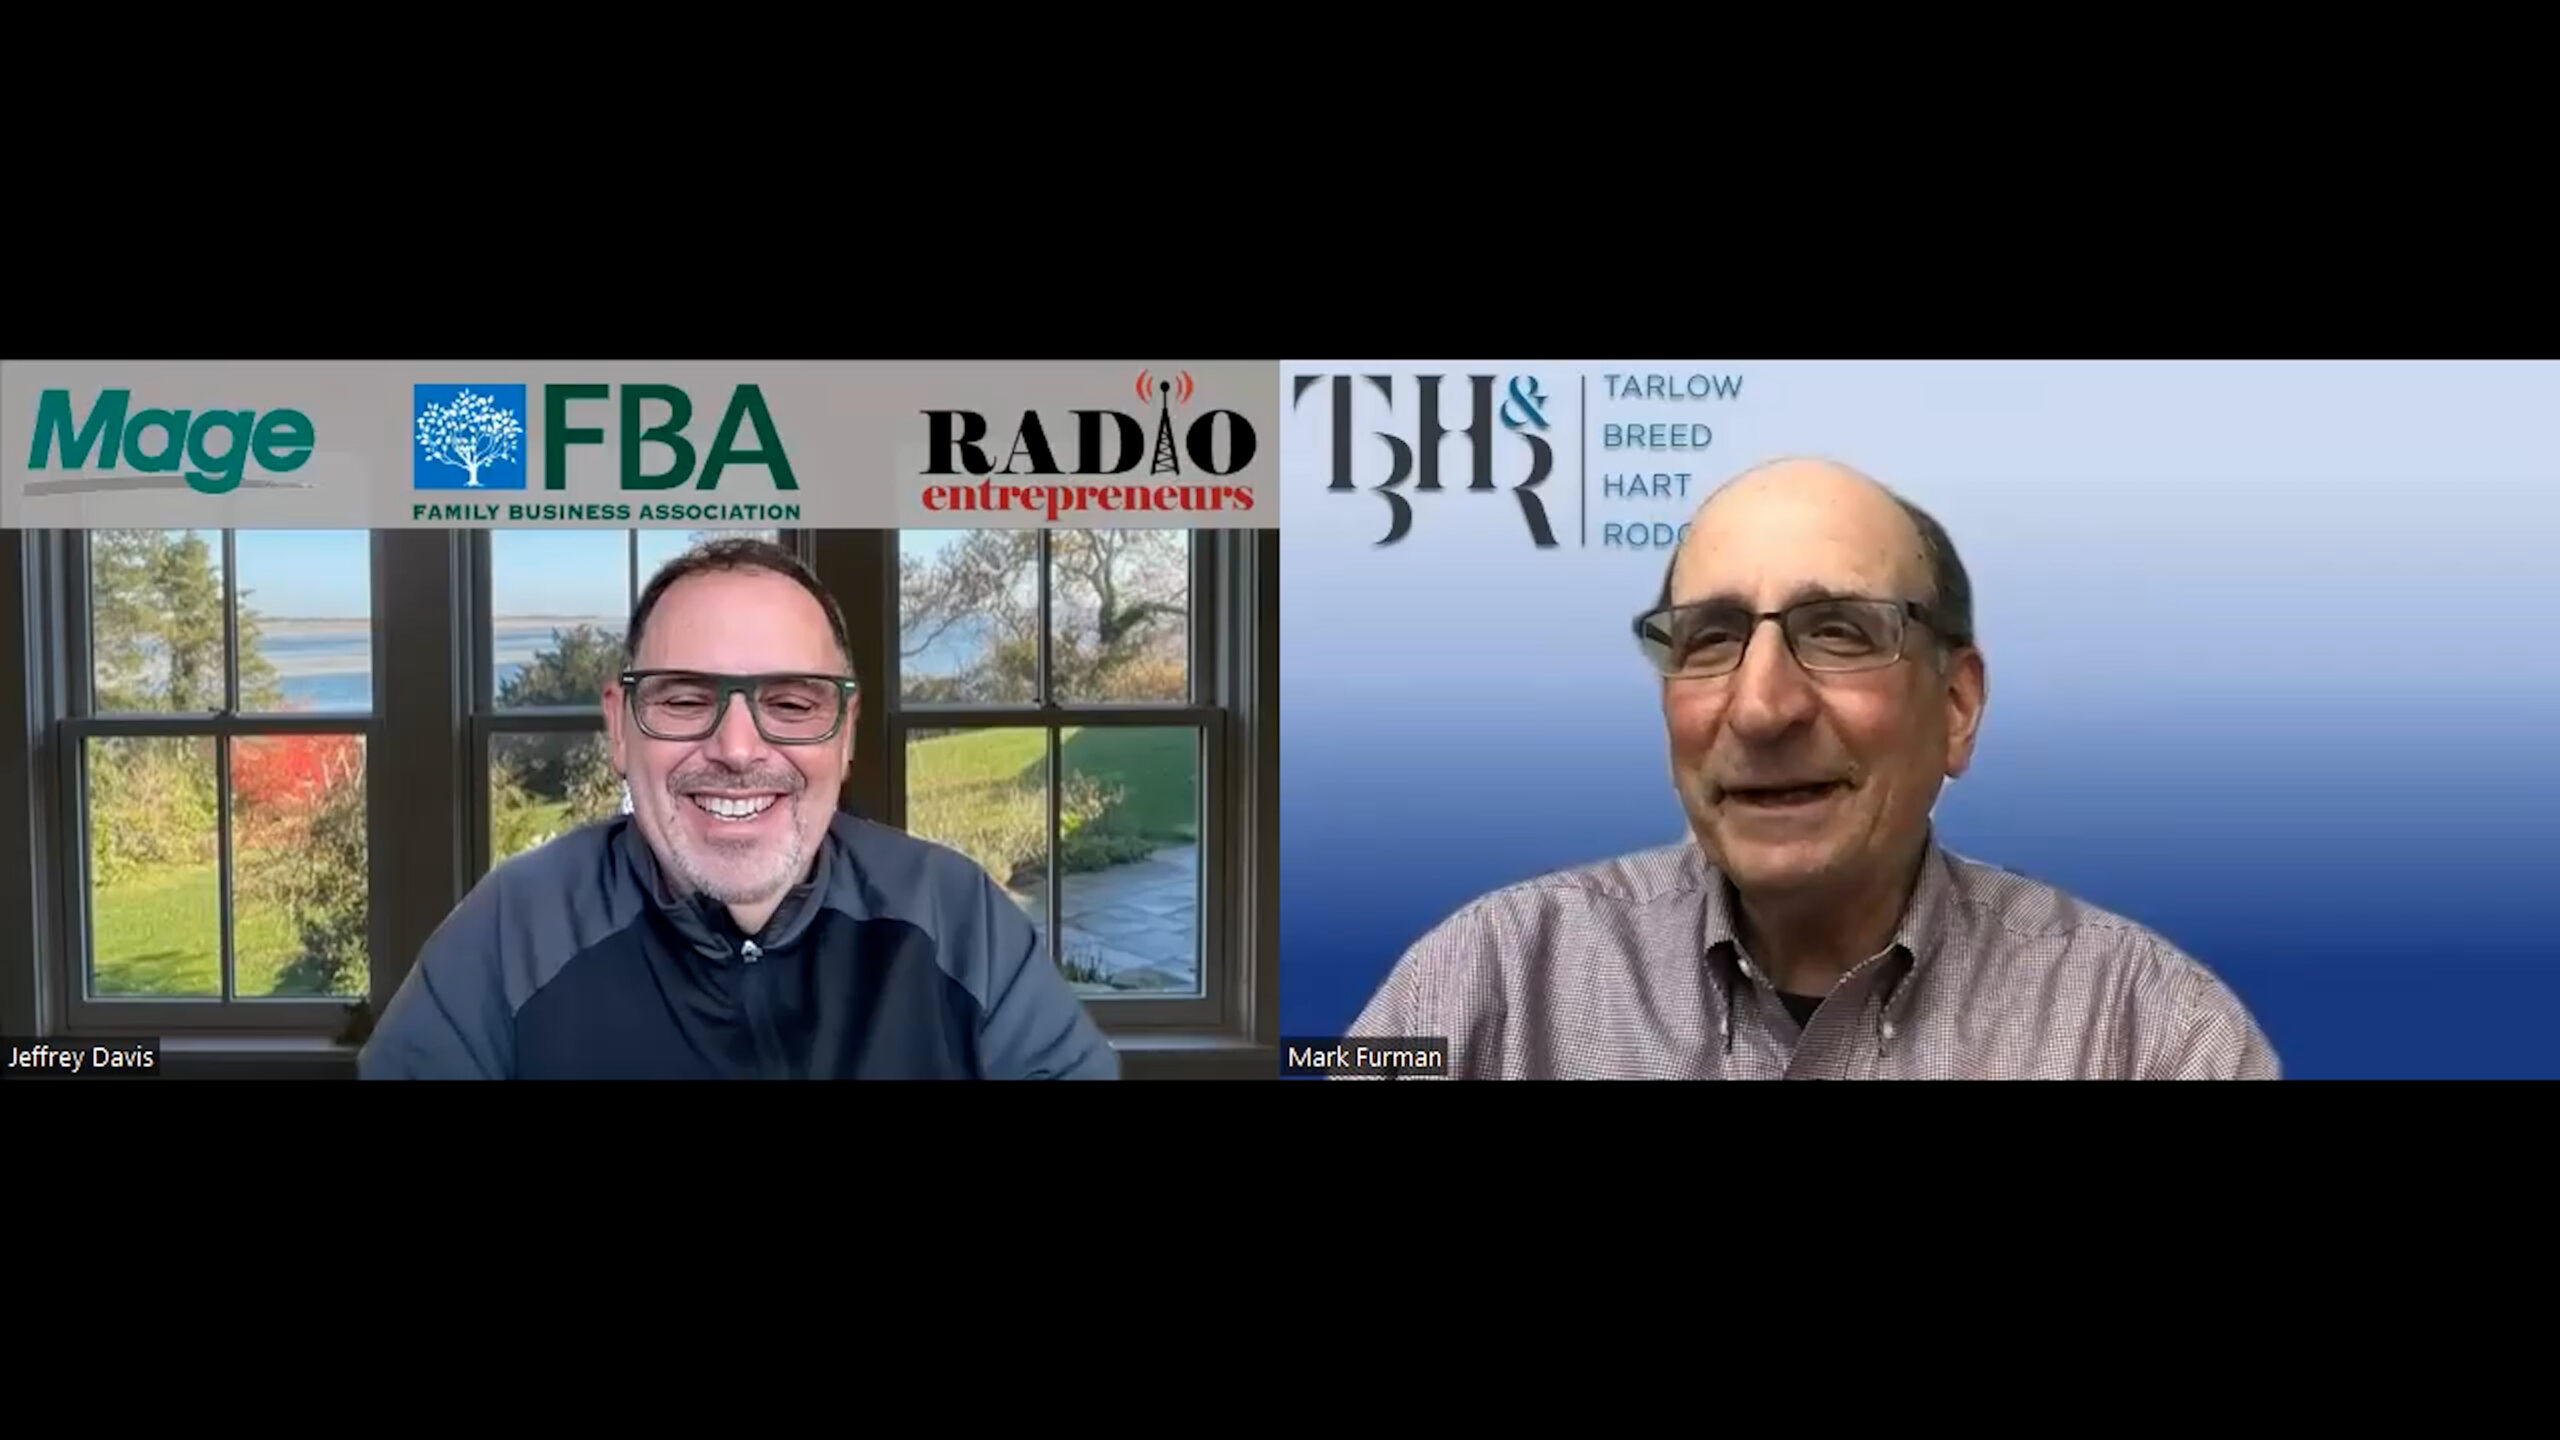 “To Get Legal Advice Or Not? Discussing Partner Disputes” with Mark Furman of TBHR